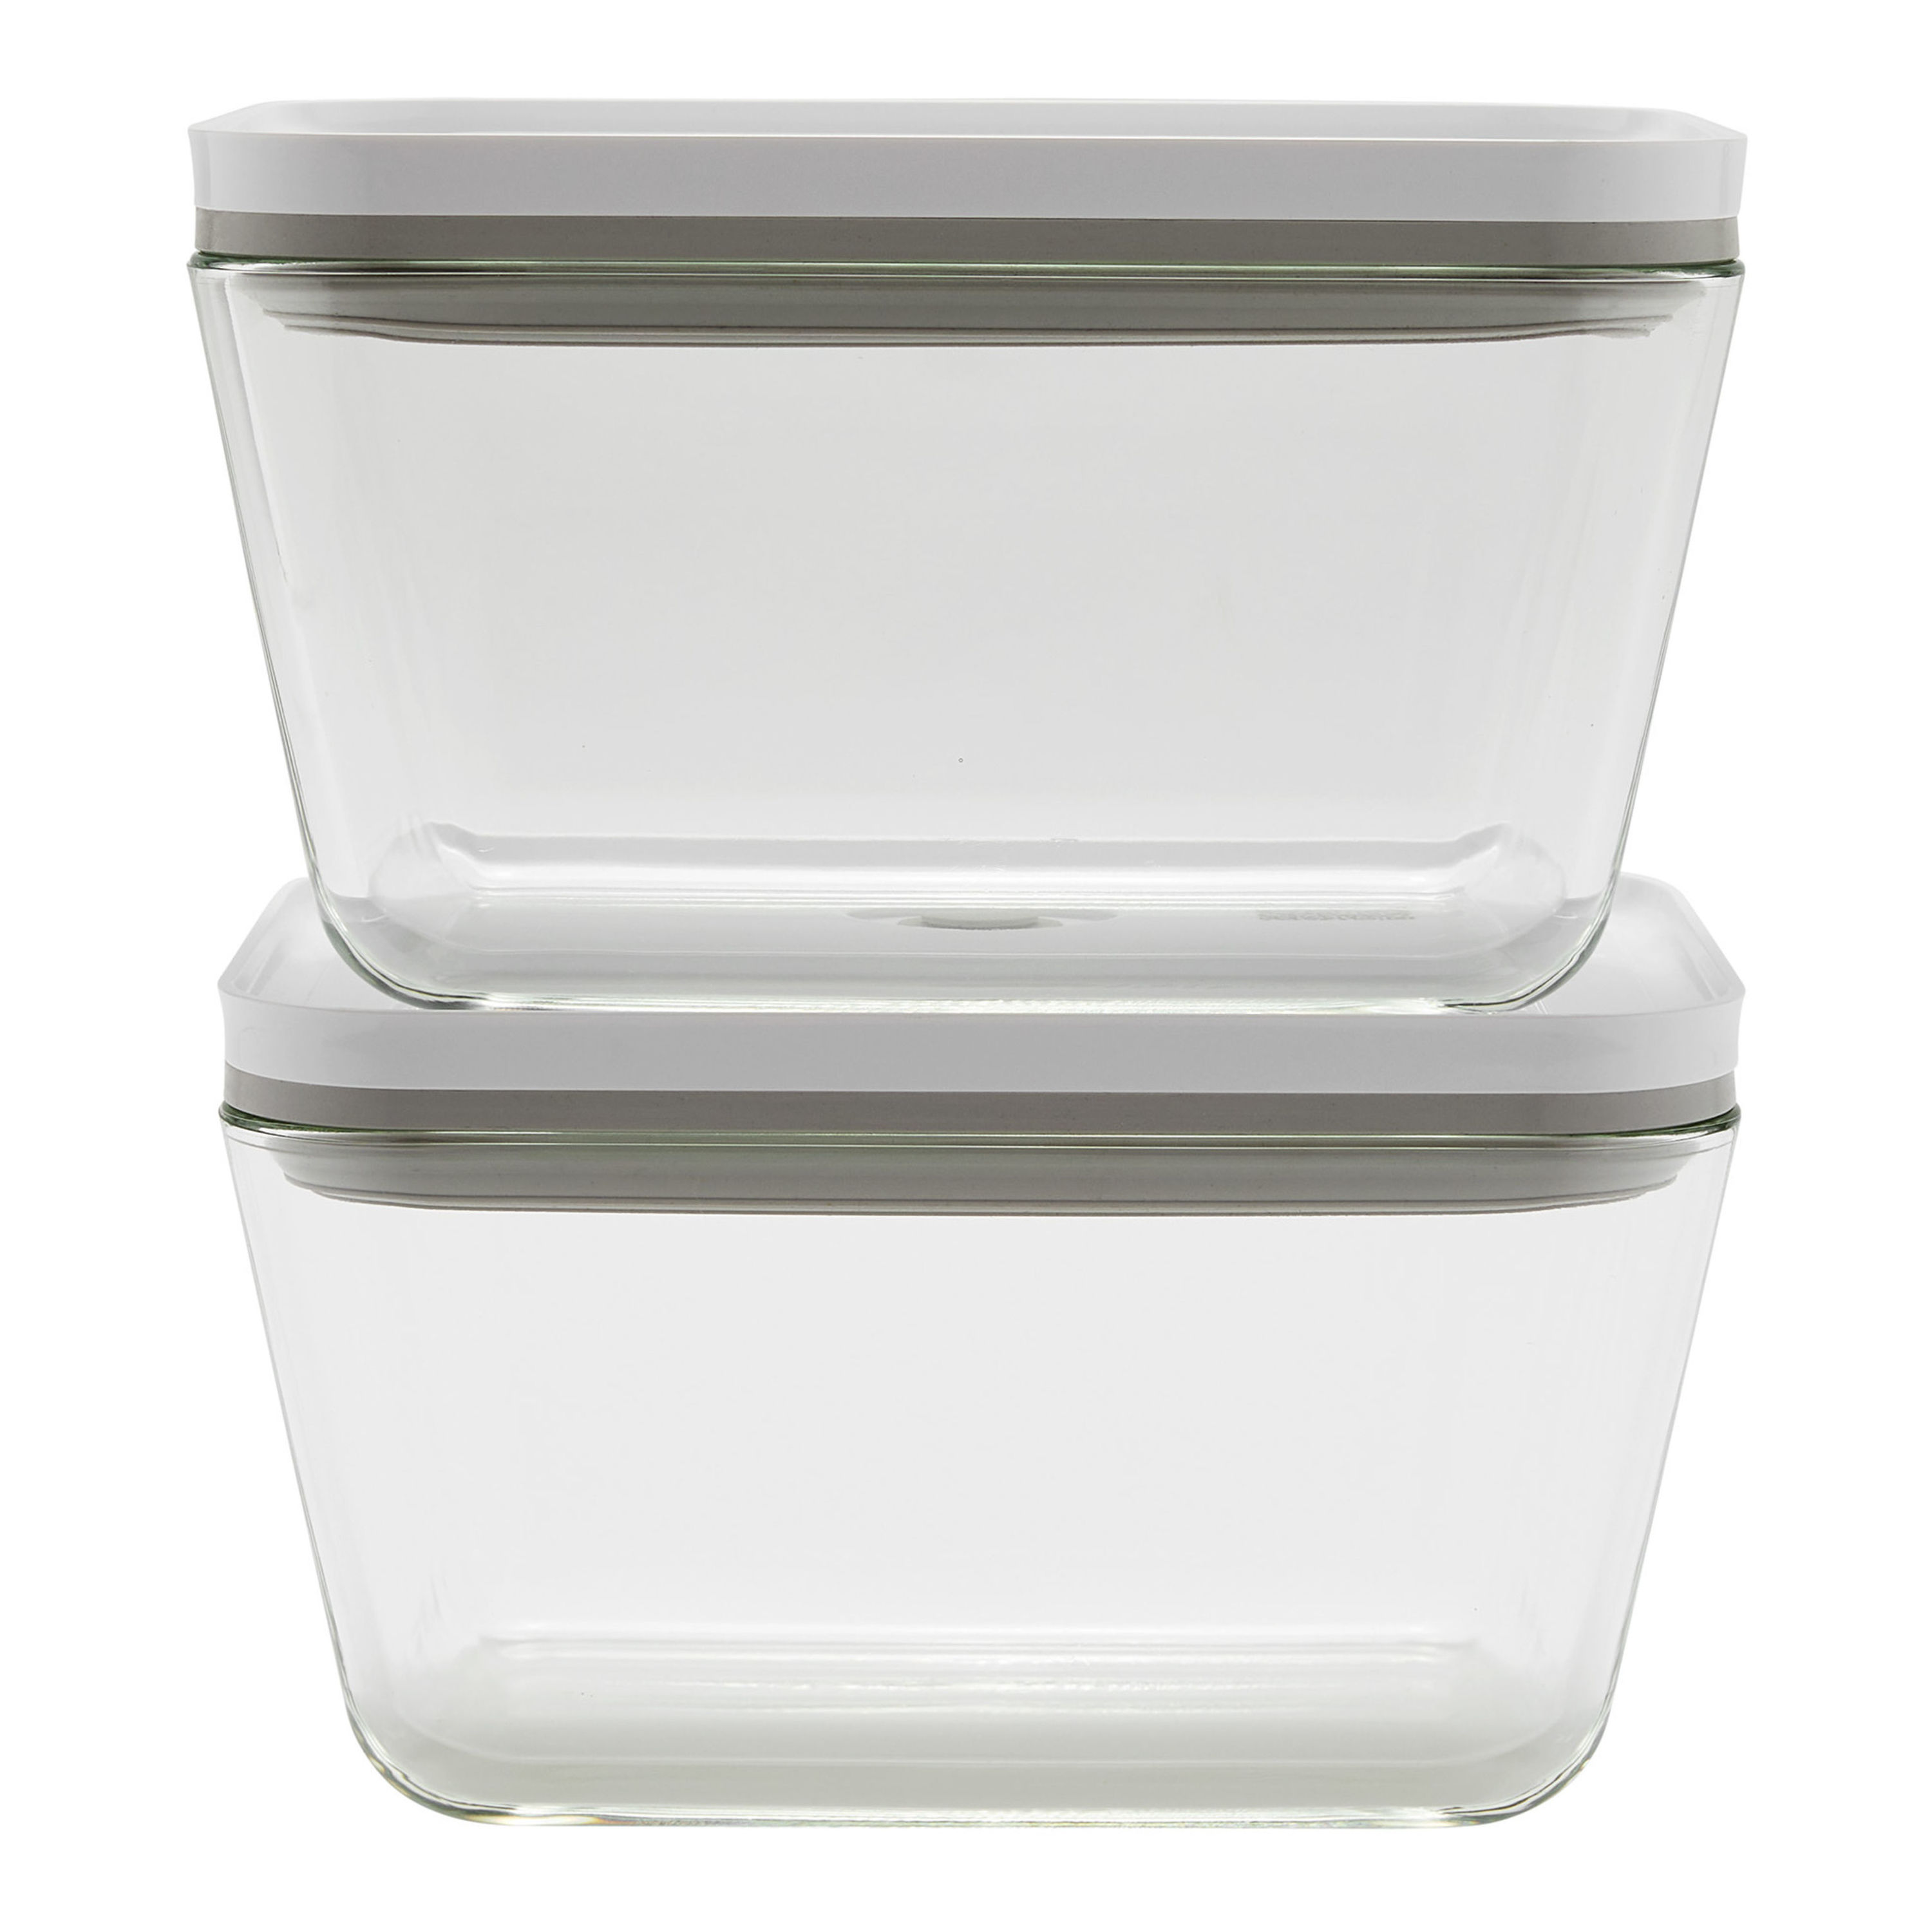 Details about   Healthy Material Lunch Box Microwave Dinnerware Food Storage Container Lunchbox 